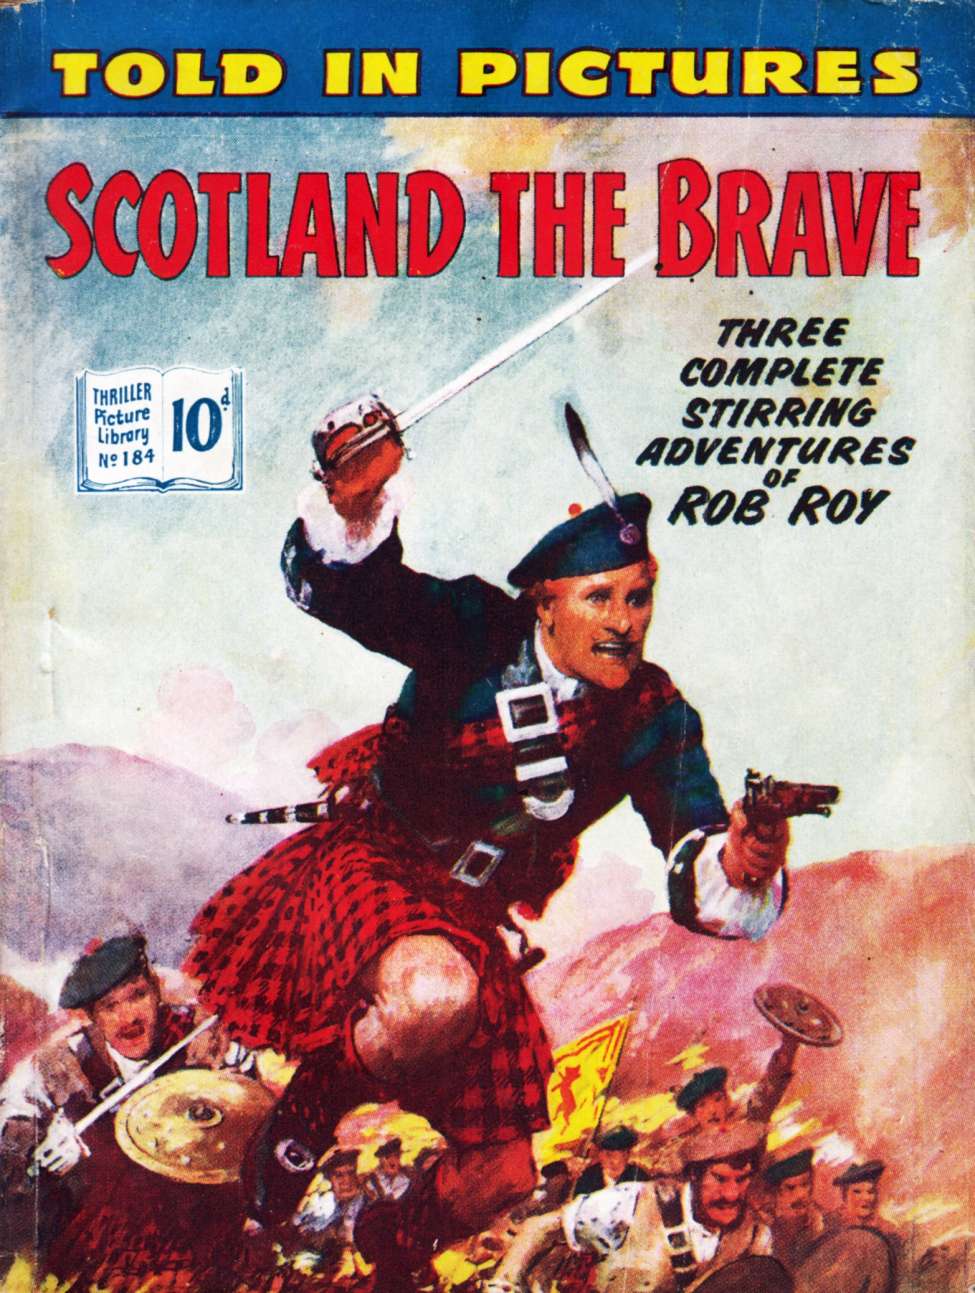 Book Cover For Thriller Picture Library 184 - Scotland the Brave